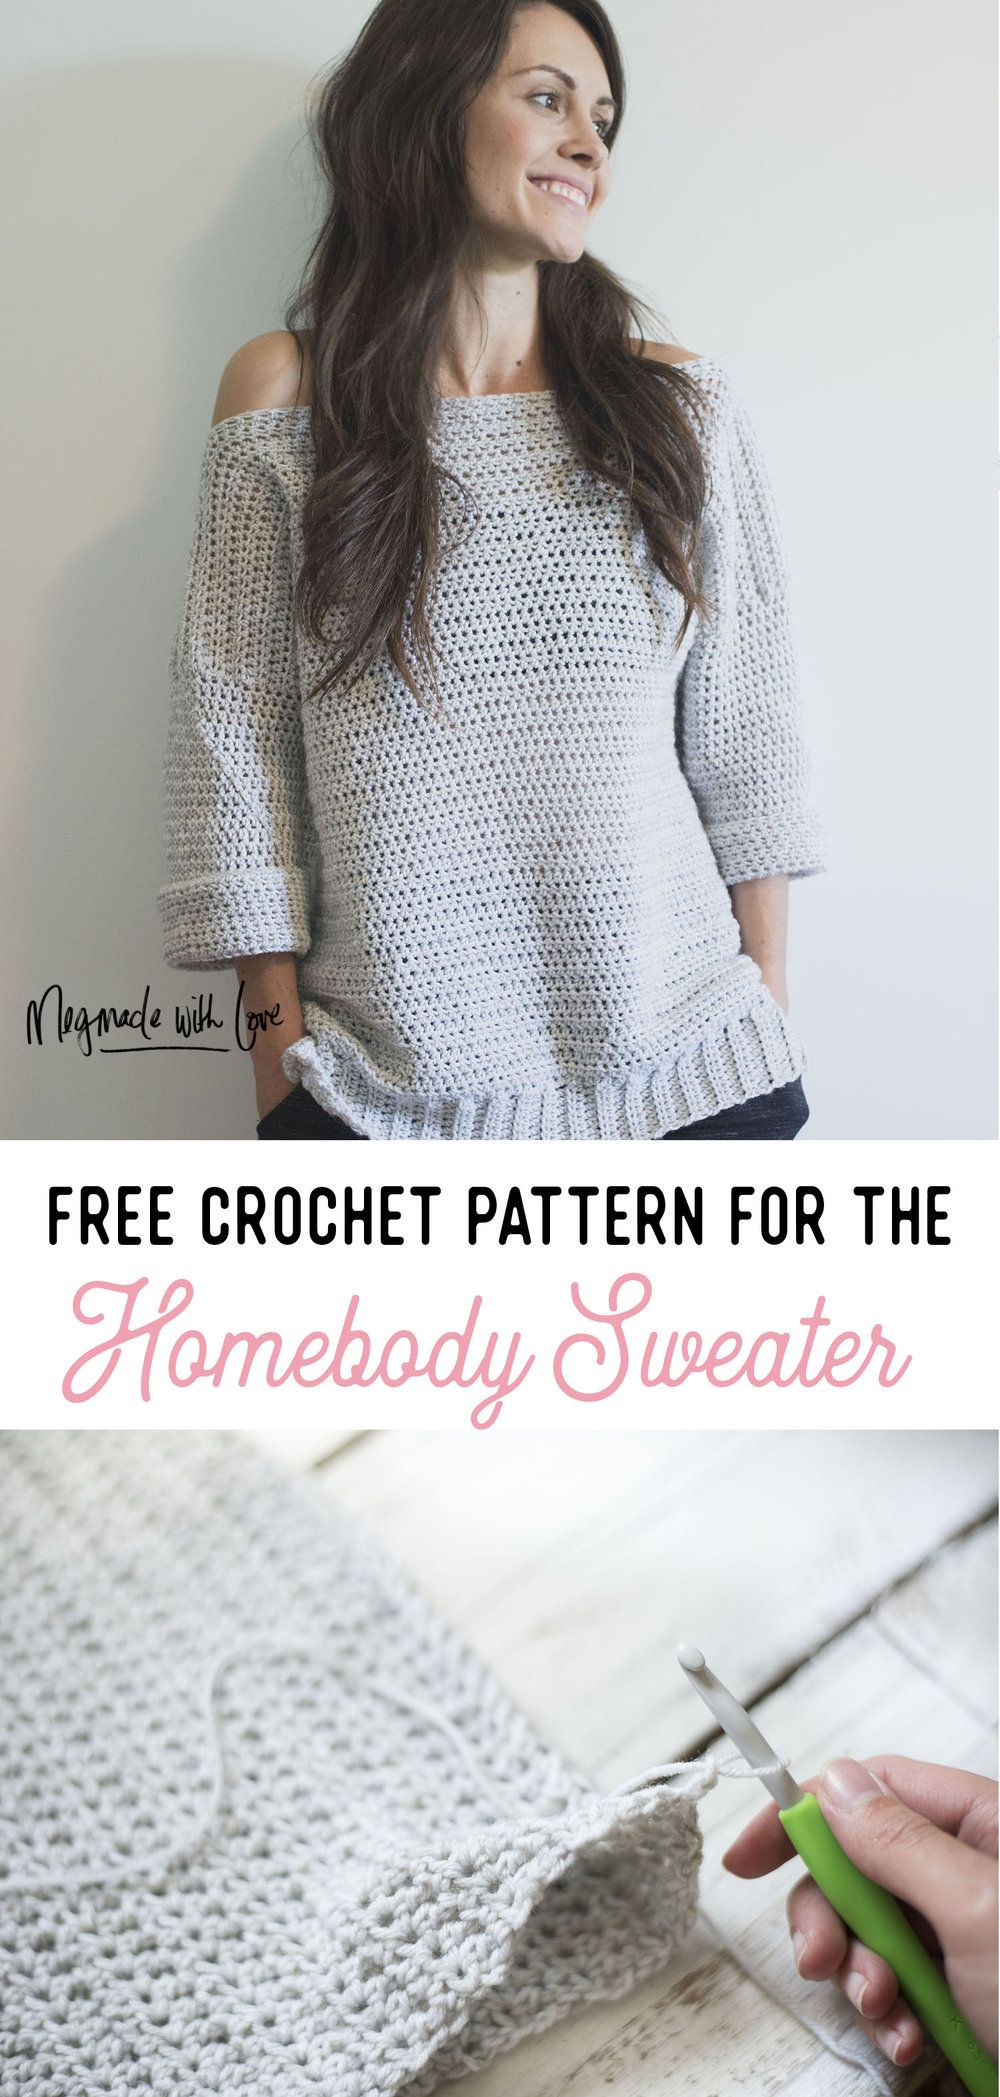 Free Crochet Sweater Patterns Free Crochet Pattern For The Homebody Sweater Easy Comfy And Cute